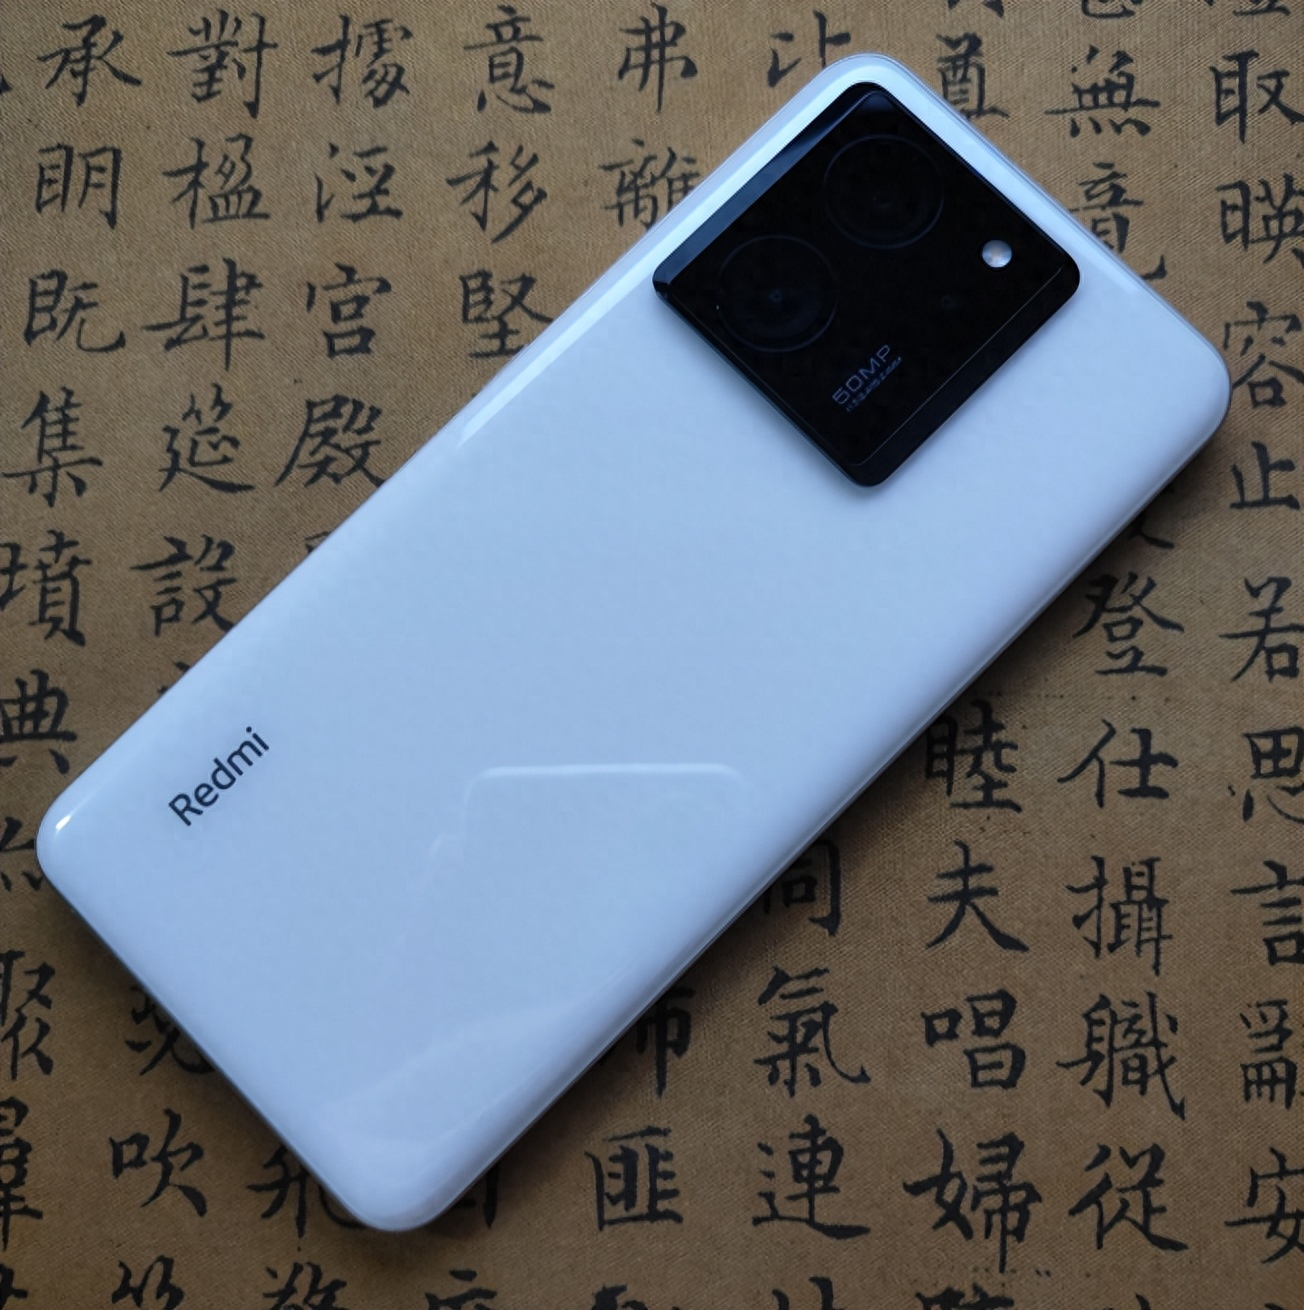 Although Hongmi phones are affordable, these four models are currently the most cost-effective, and even if you close your eyes, you won't lose out